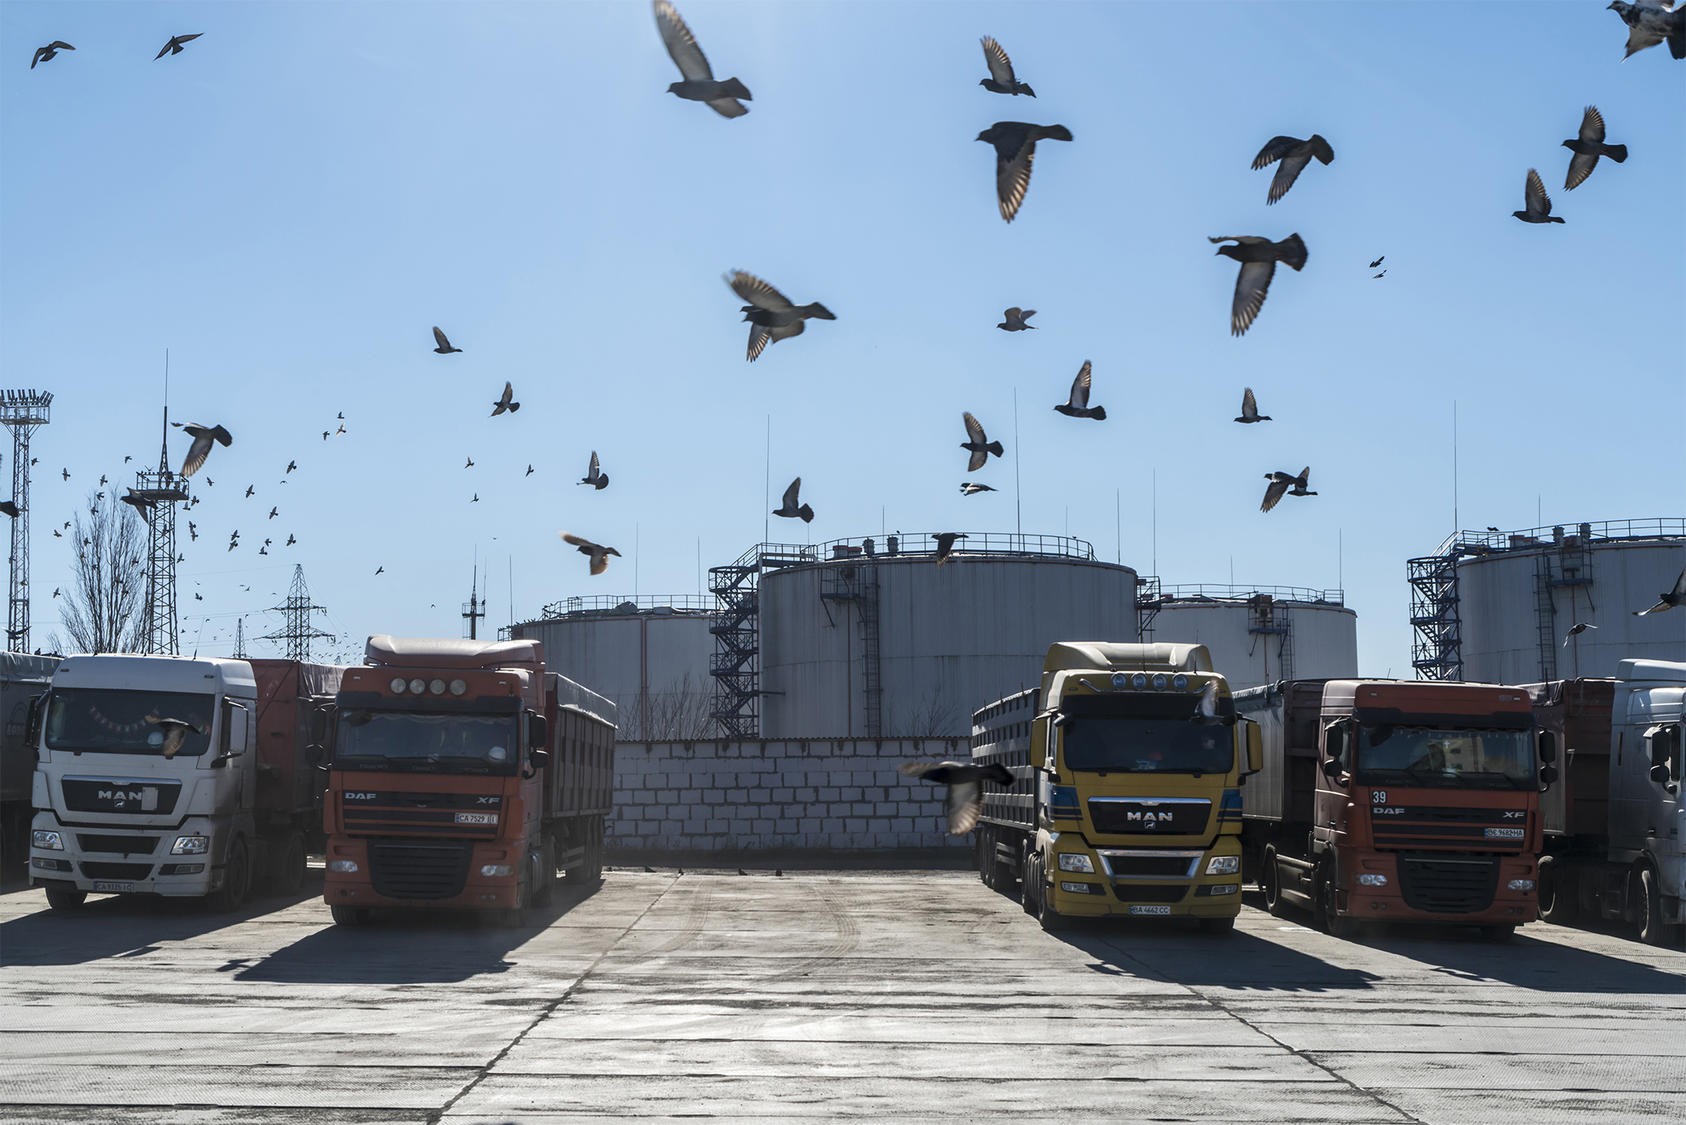 Trucks loaded with wheat at Ukraine's Port of Mykolaiv in Ukraine, Feb. 14, 2022. The U.N. warned on April 16 that closures of ports on the Black Sea could trigger a global food catastrophe that yields starvation, mass migration and political instability. (Brendan Hoffman/The New York Times)